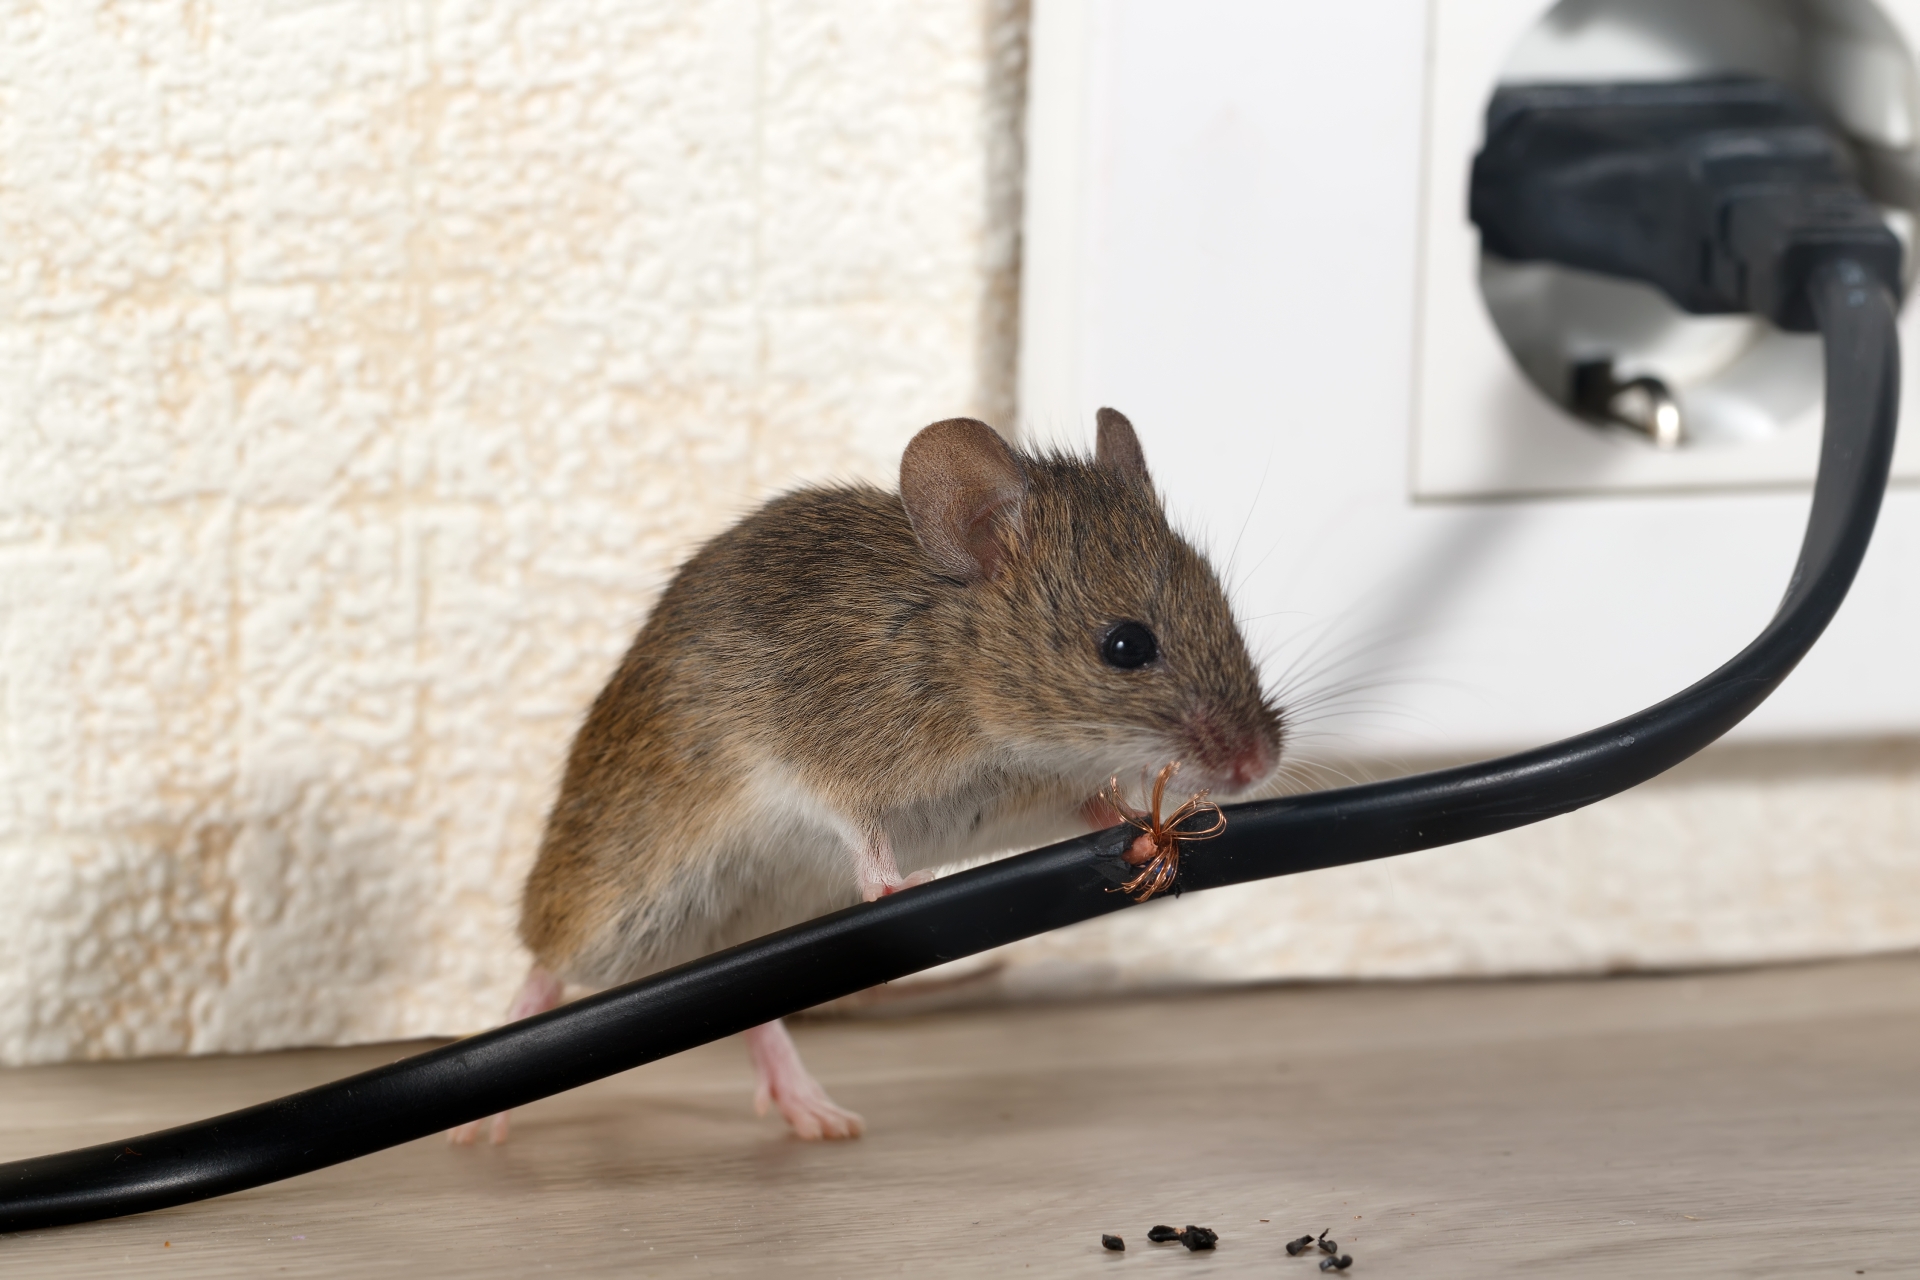 Mice Infestation, Pest Control in Chigwell Row, Chigwell, IG7. Call Now 020 8166 9746